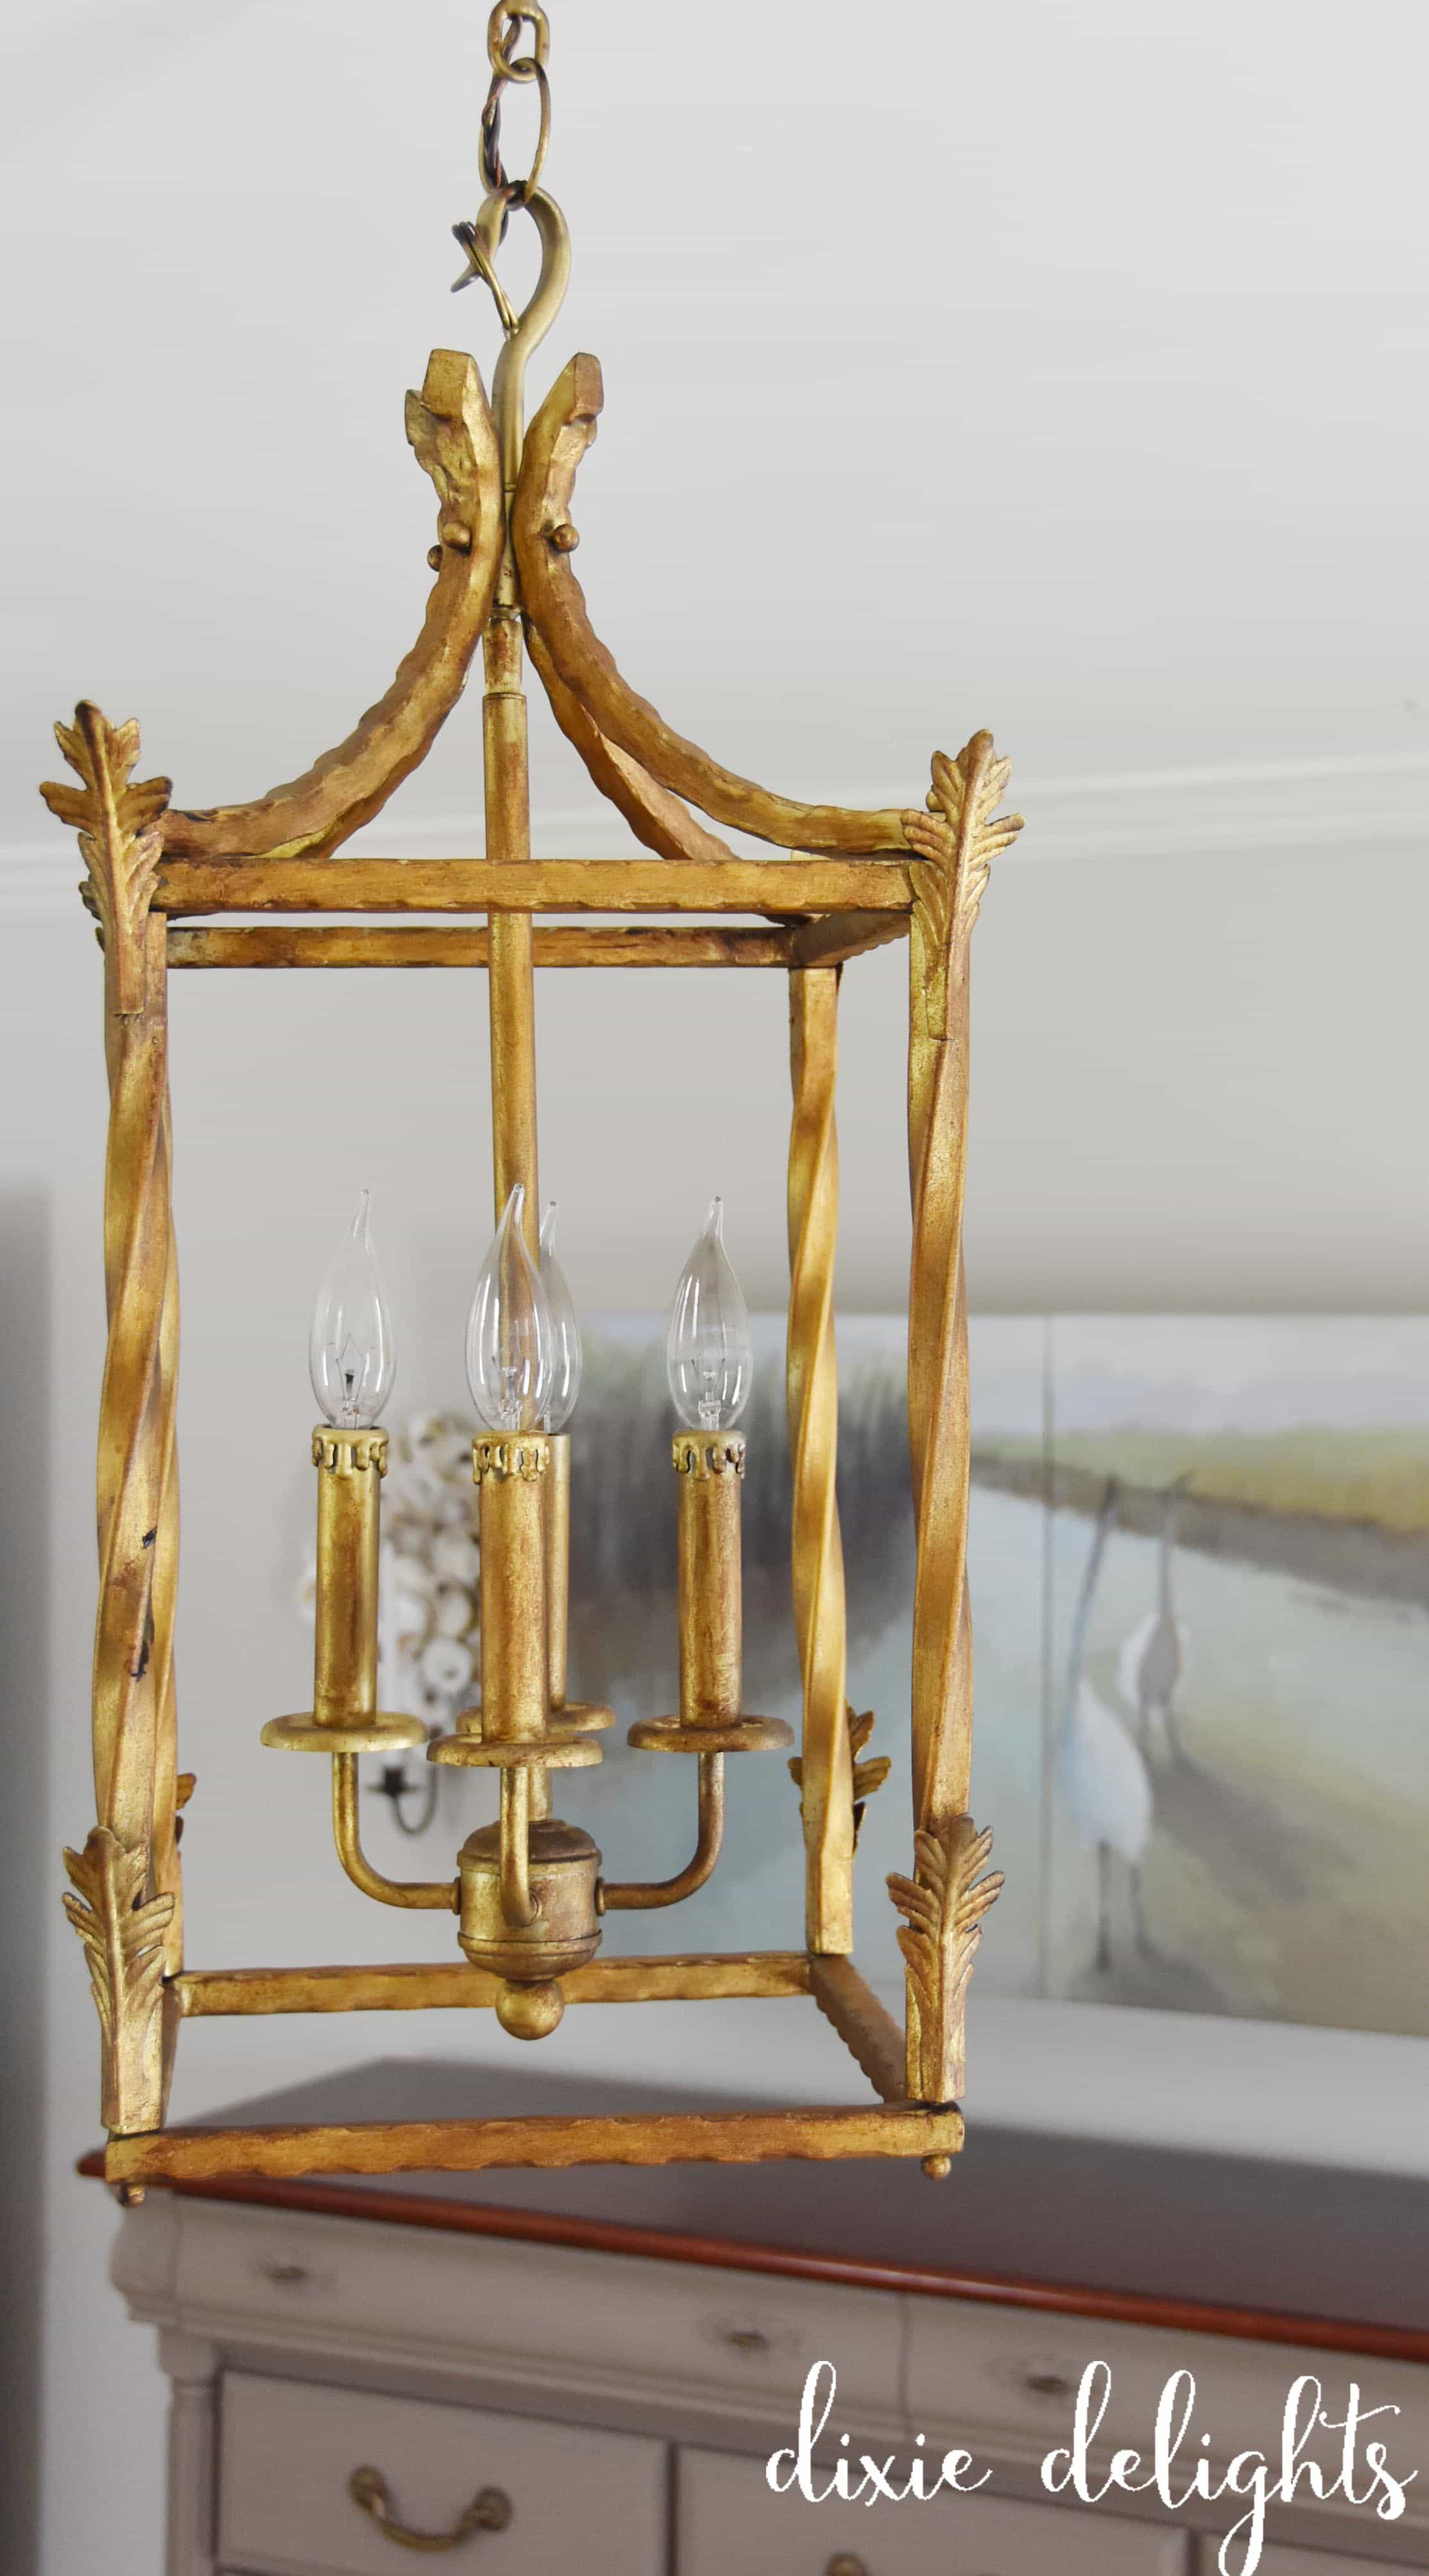 Antique Gold Chandelier Finish, How To Spray Paint An Old Chandelier